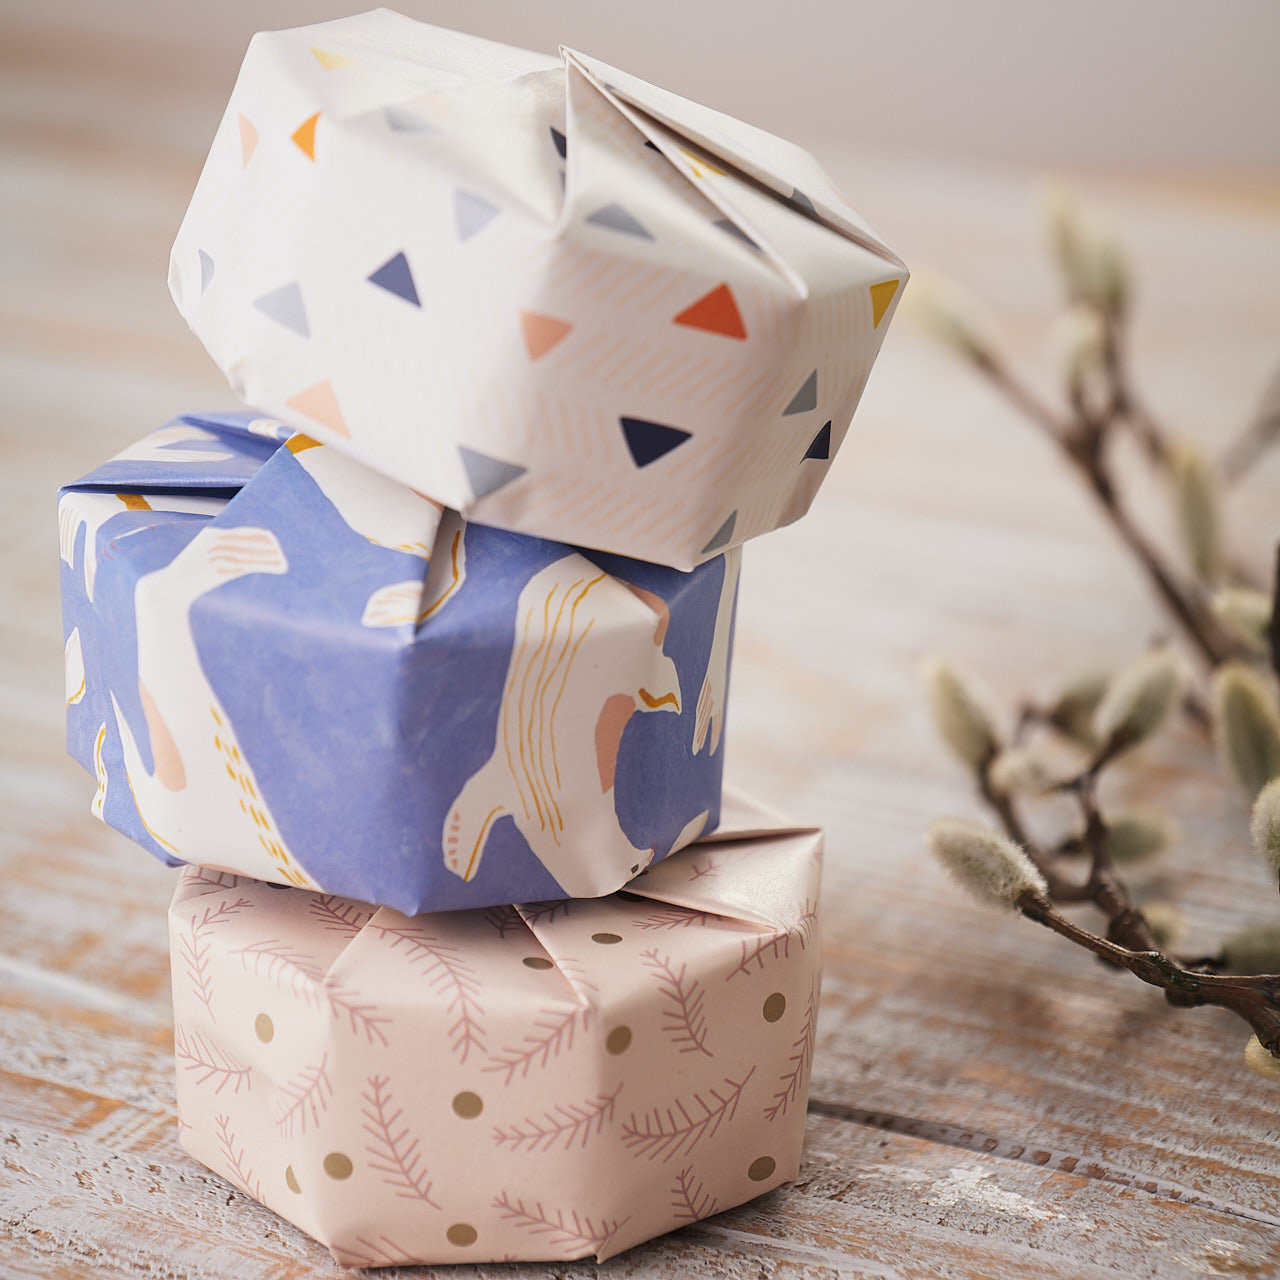 3 piled gifts with Impression Originale recycled and original design gift wraps